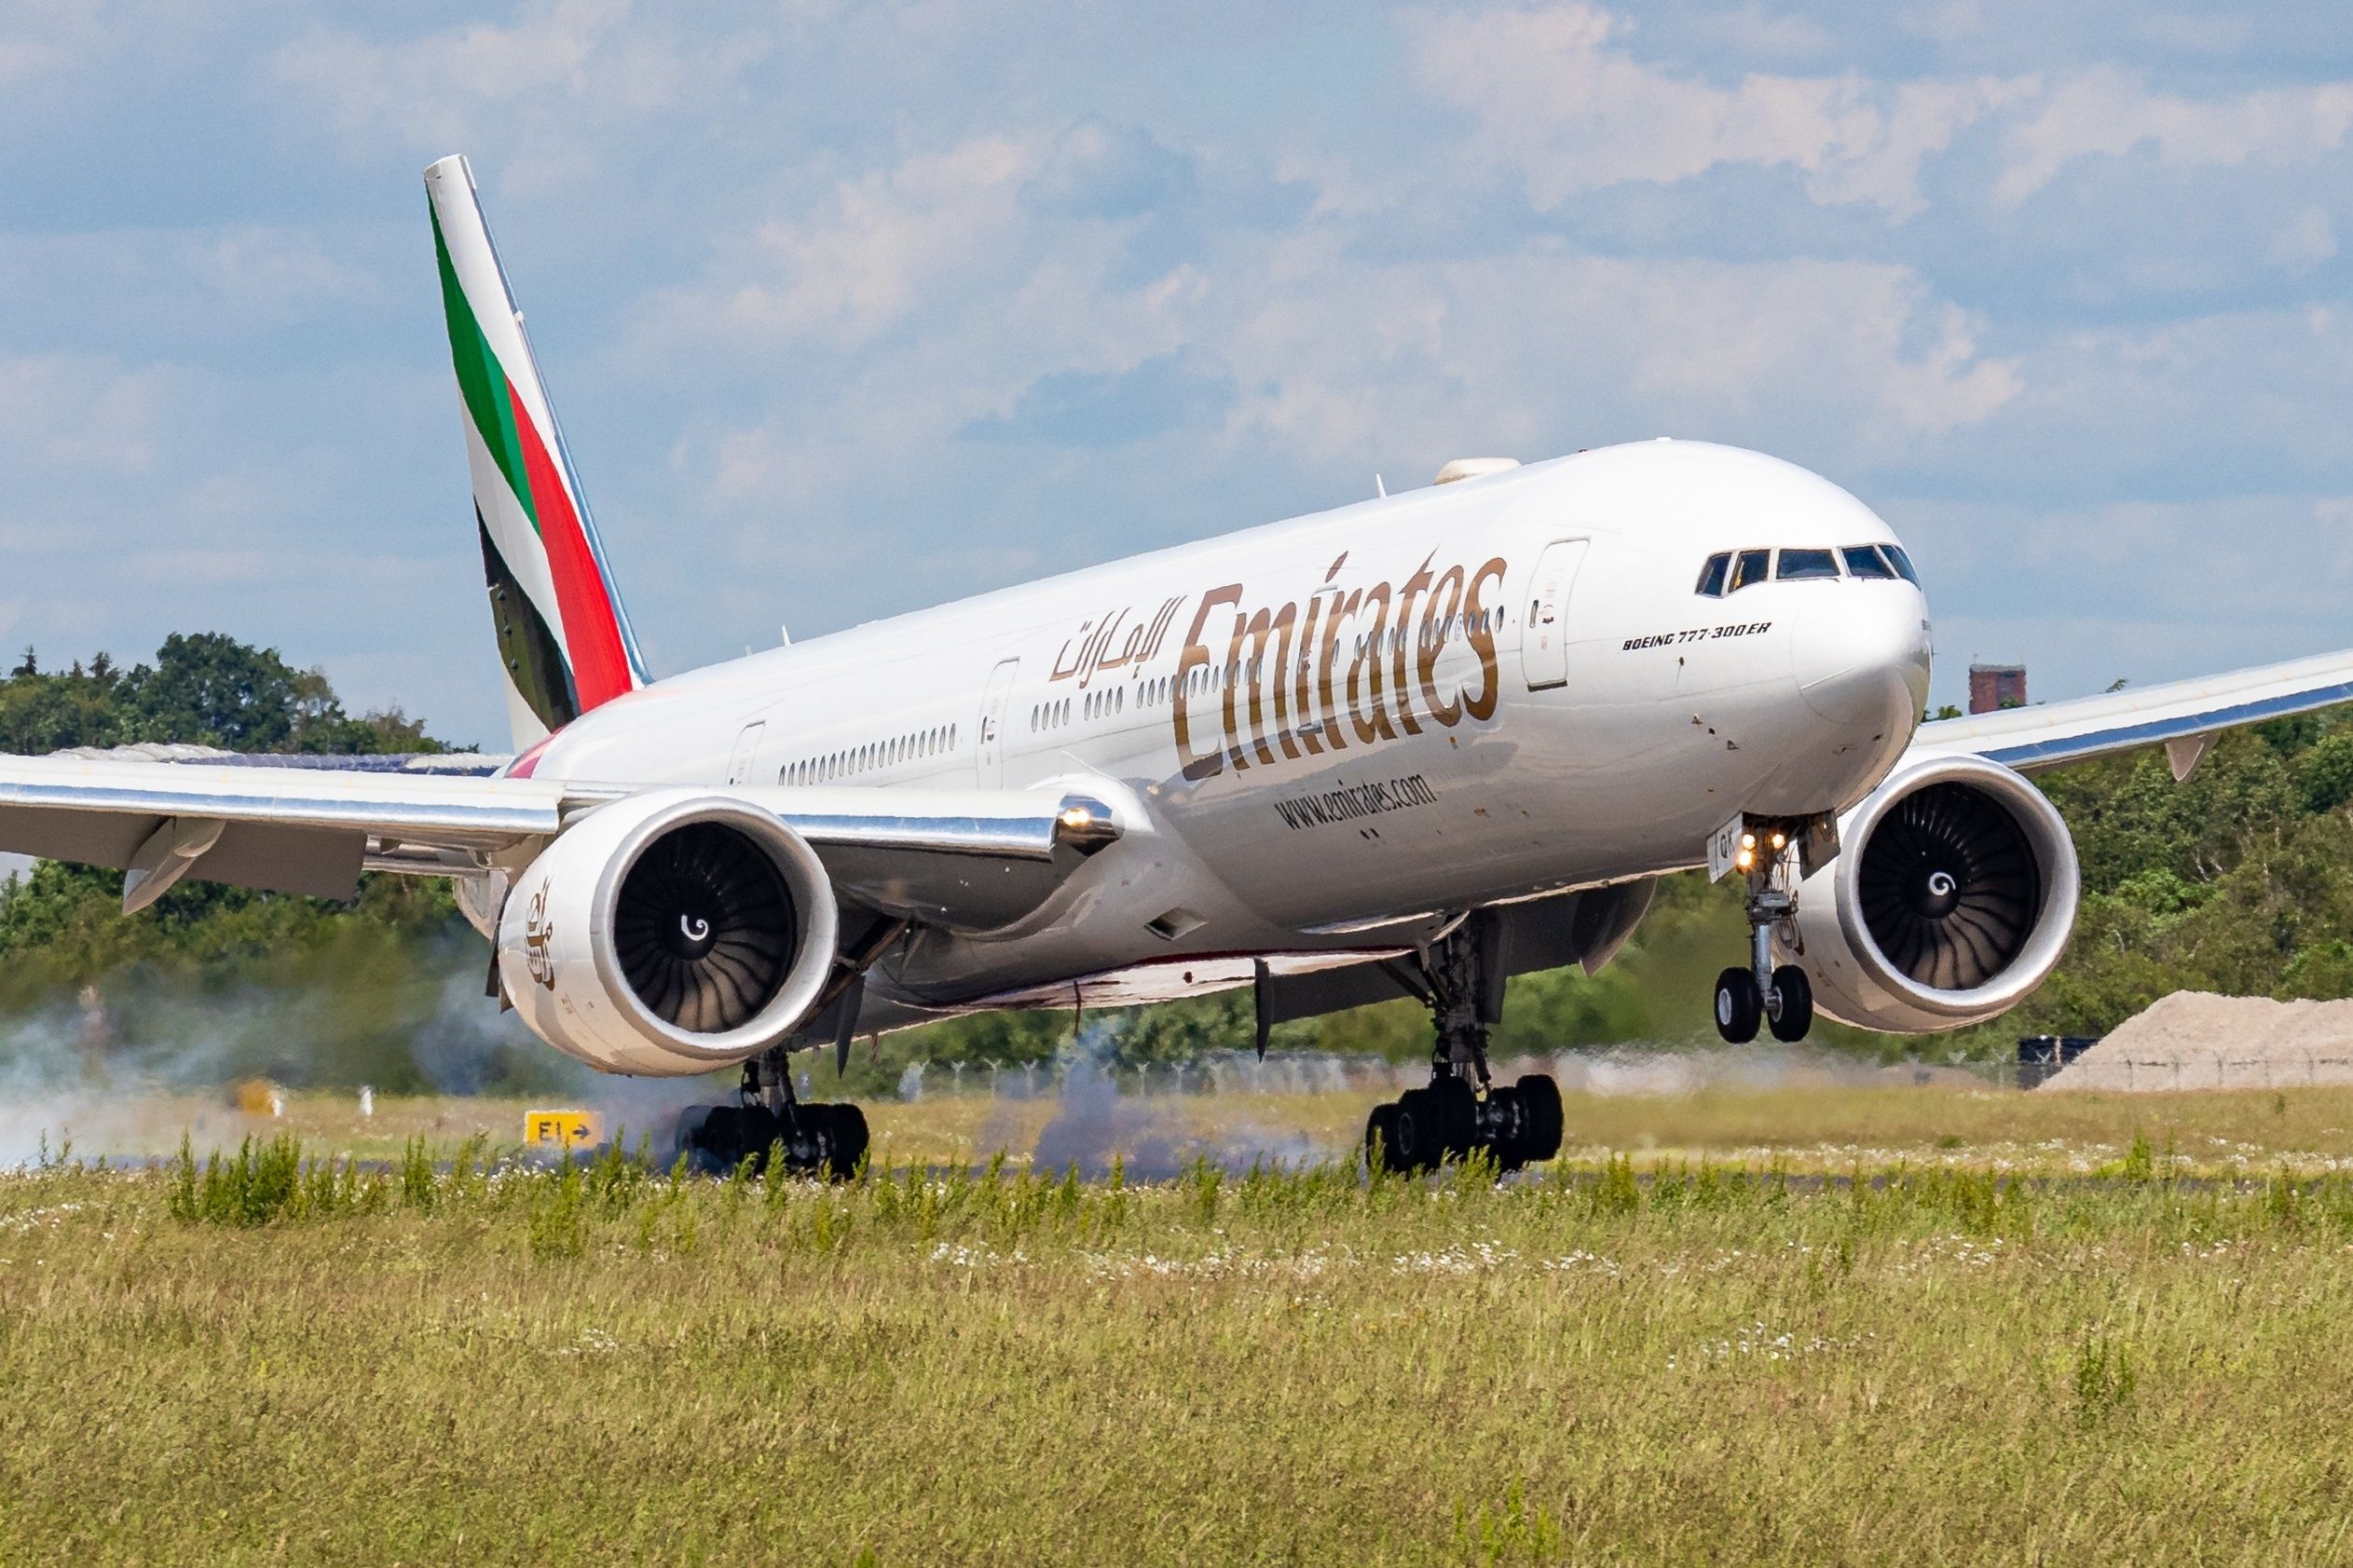 An Emirates 777-300ER just as it lands on a runway.